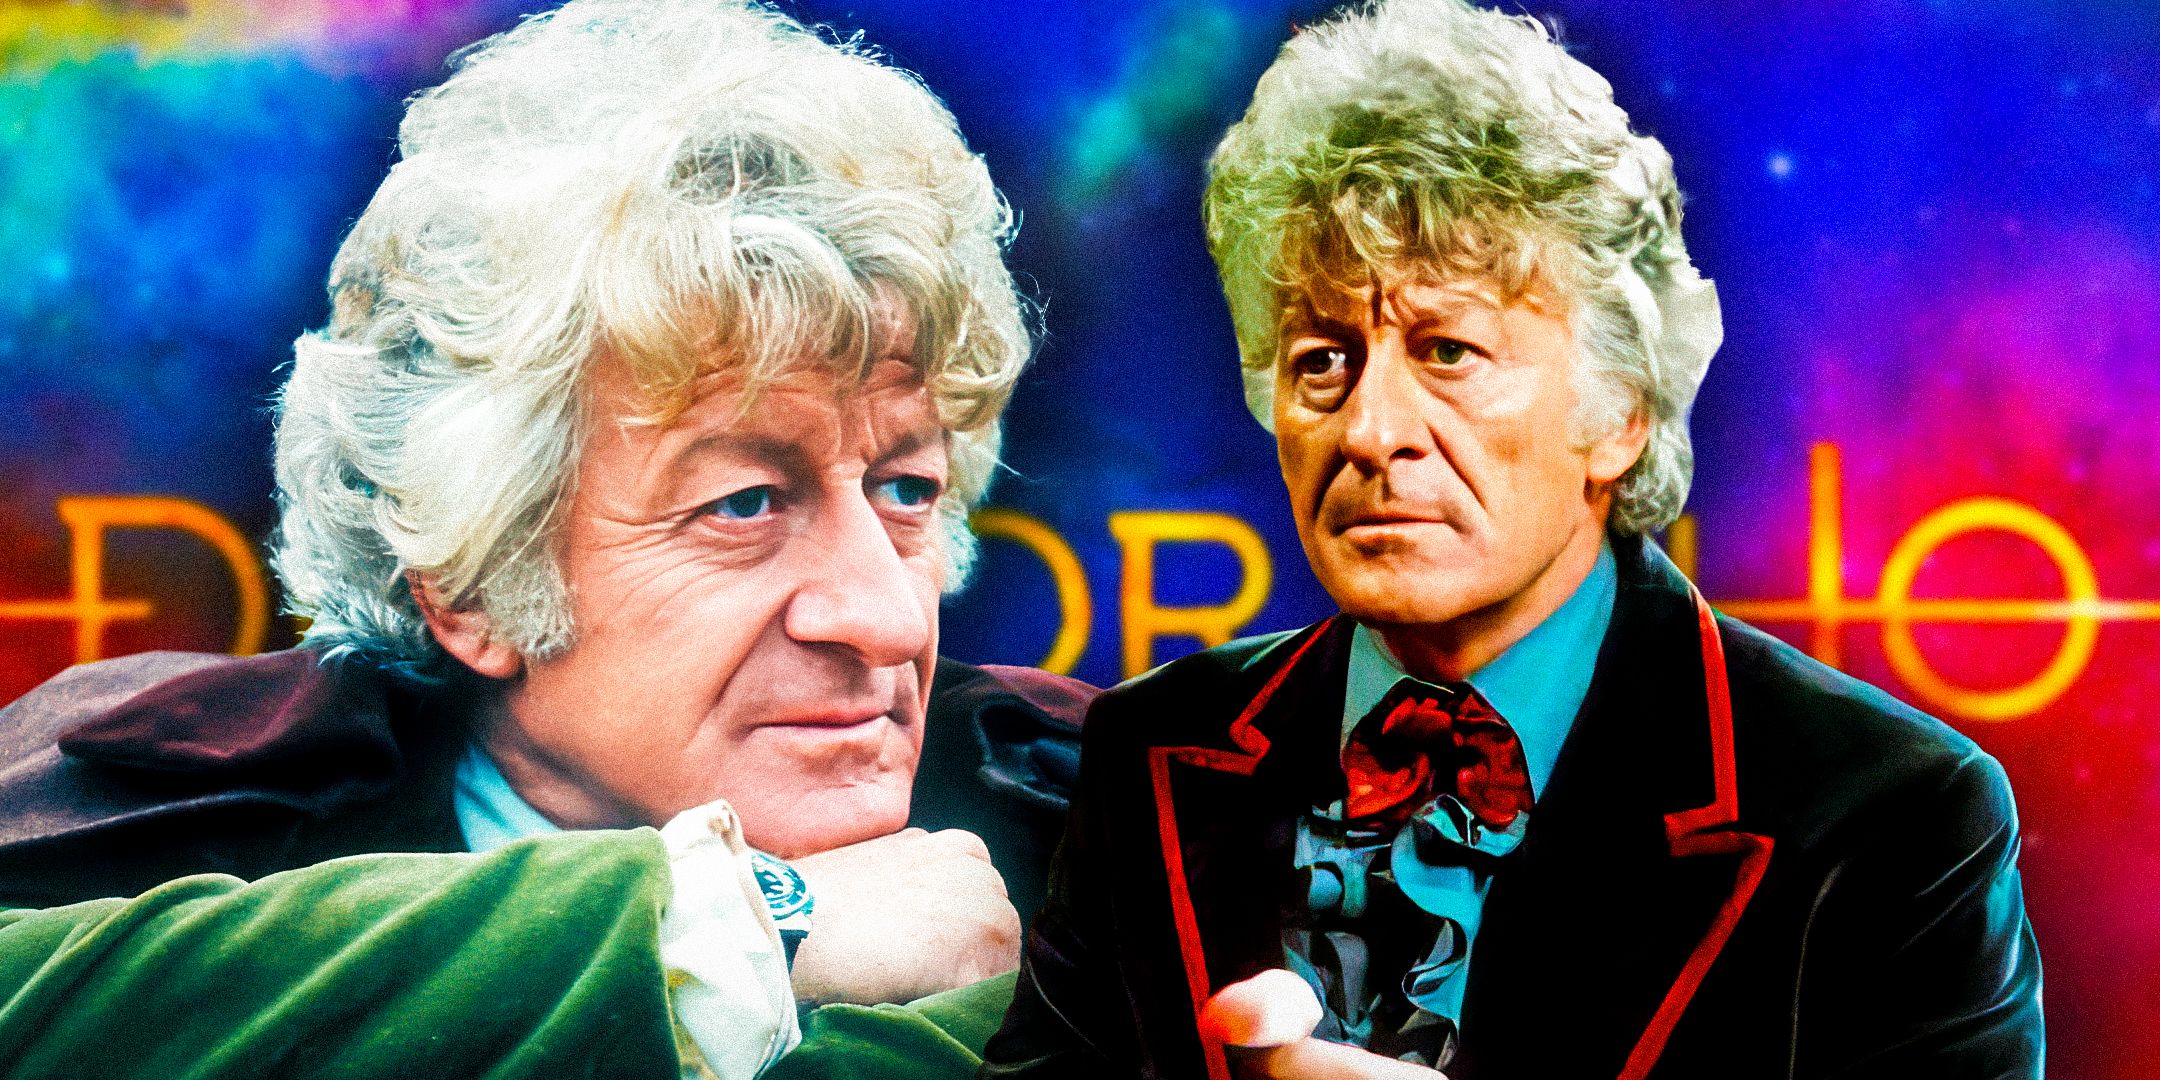 Jon-Pertwee's--Doctor-From-Doctor-Who